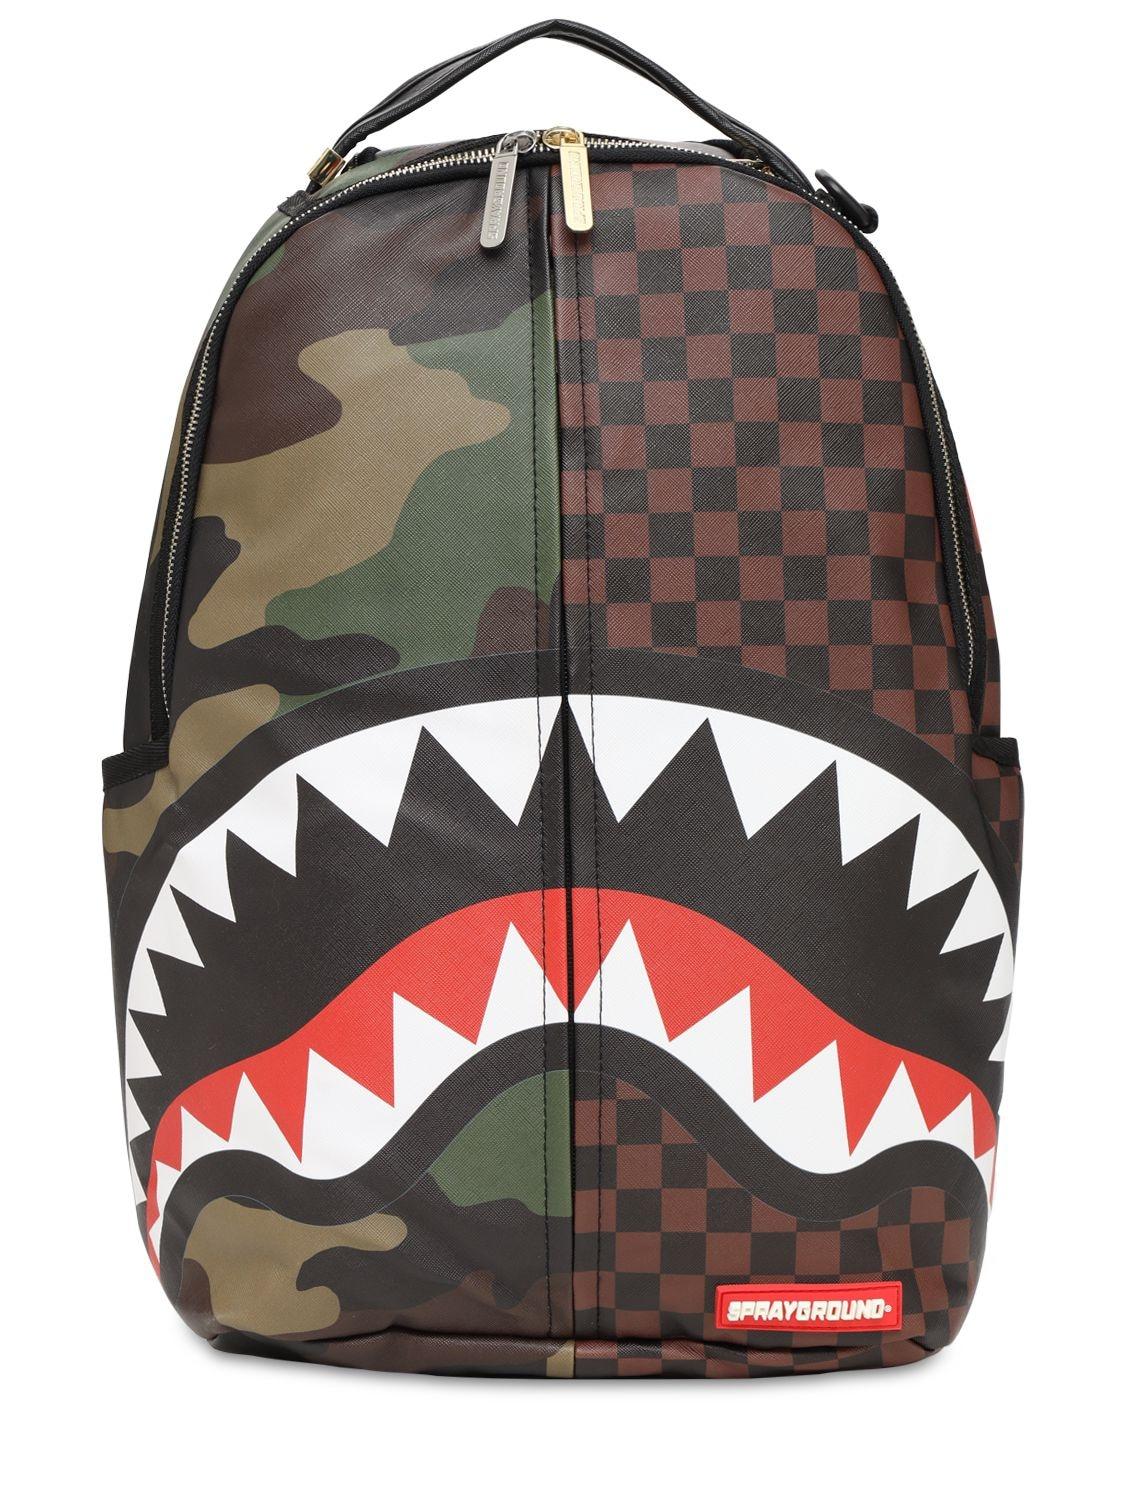 Sprayground Check & Camo Backpack for Men - Lyst